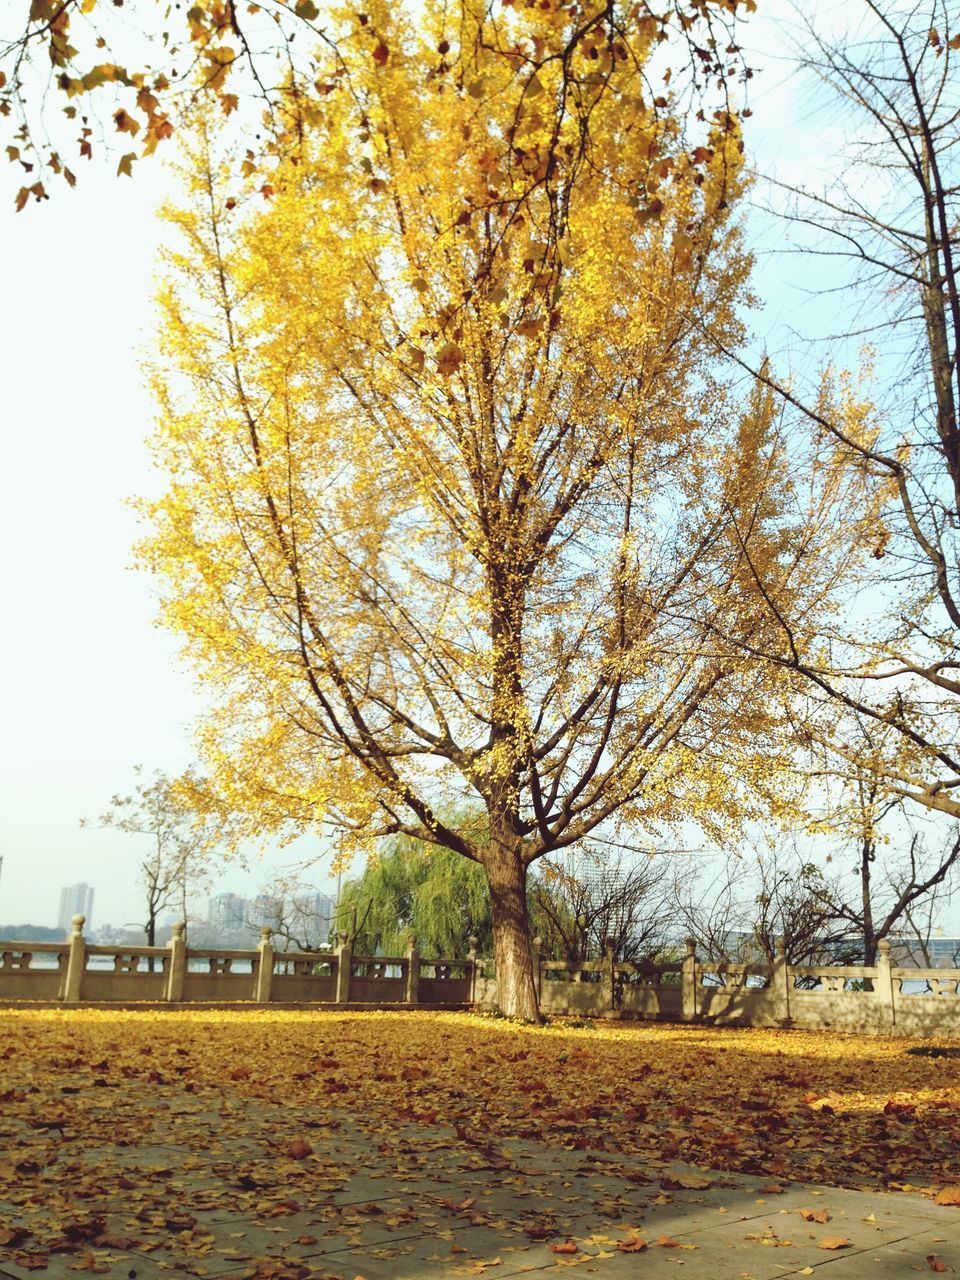 tree, autumn, change, branch, season, tranquility, nature, yellow, growth, beauty in nature, clear sky, park - man made space, field, tranquil scene, tree trunk, bare tree, landscape, leaf, day, scenics